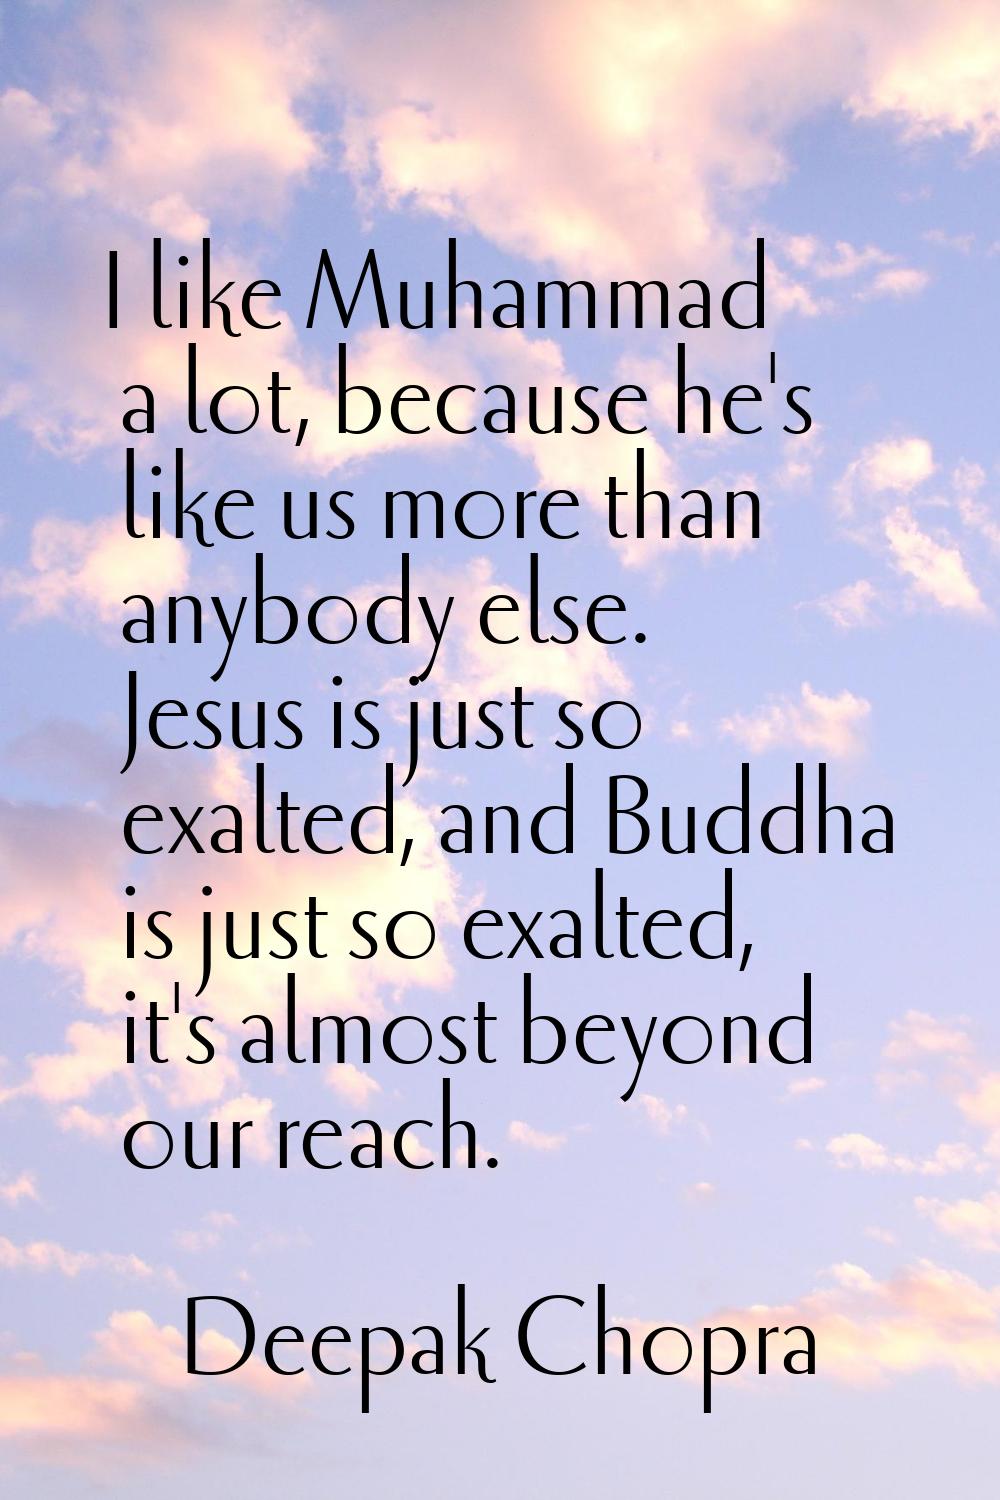 I like Muhammad a lot, because he's like us more than anybody else. Jesus is just so exalted, and B